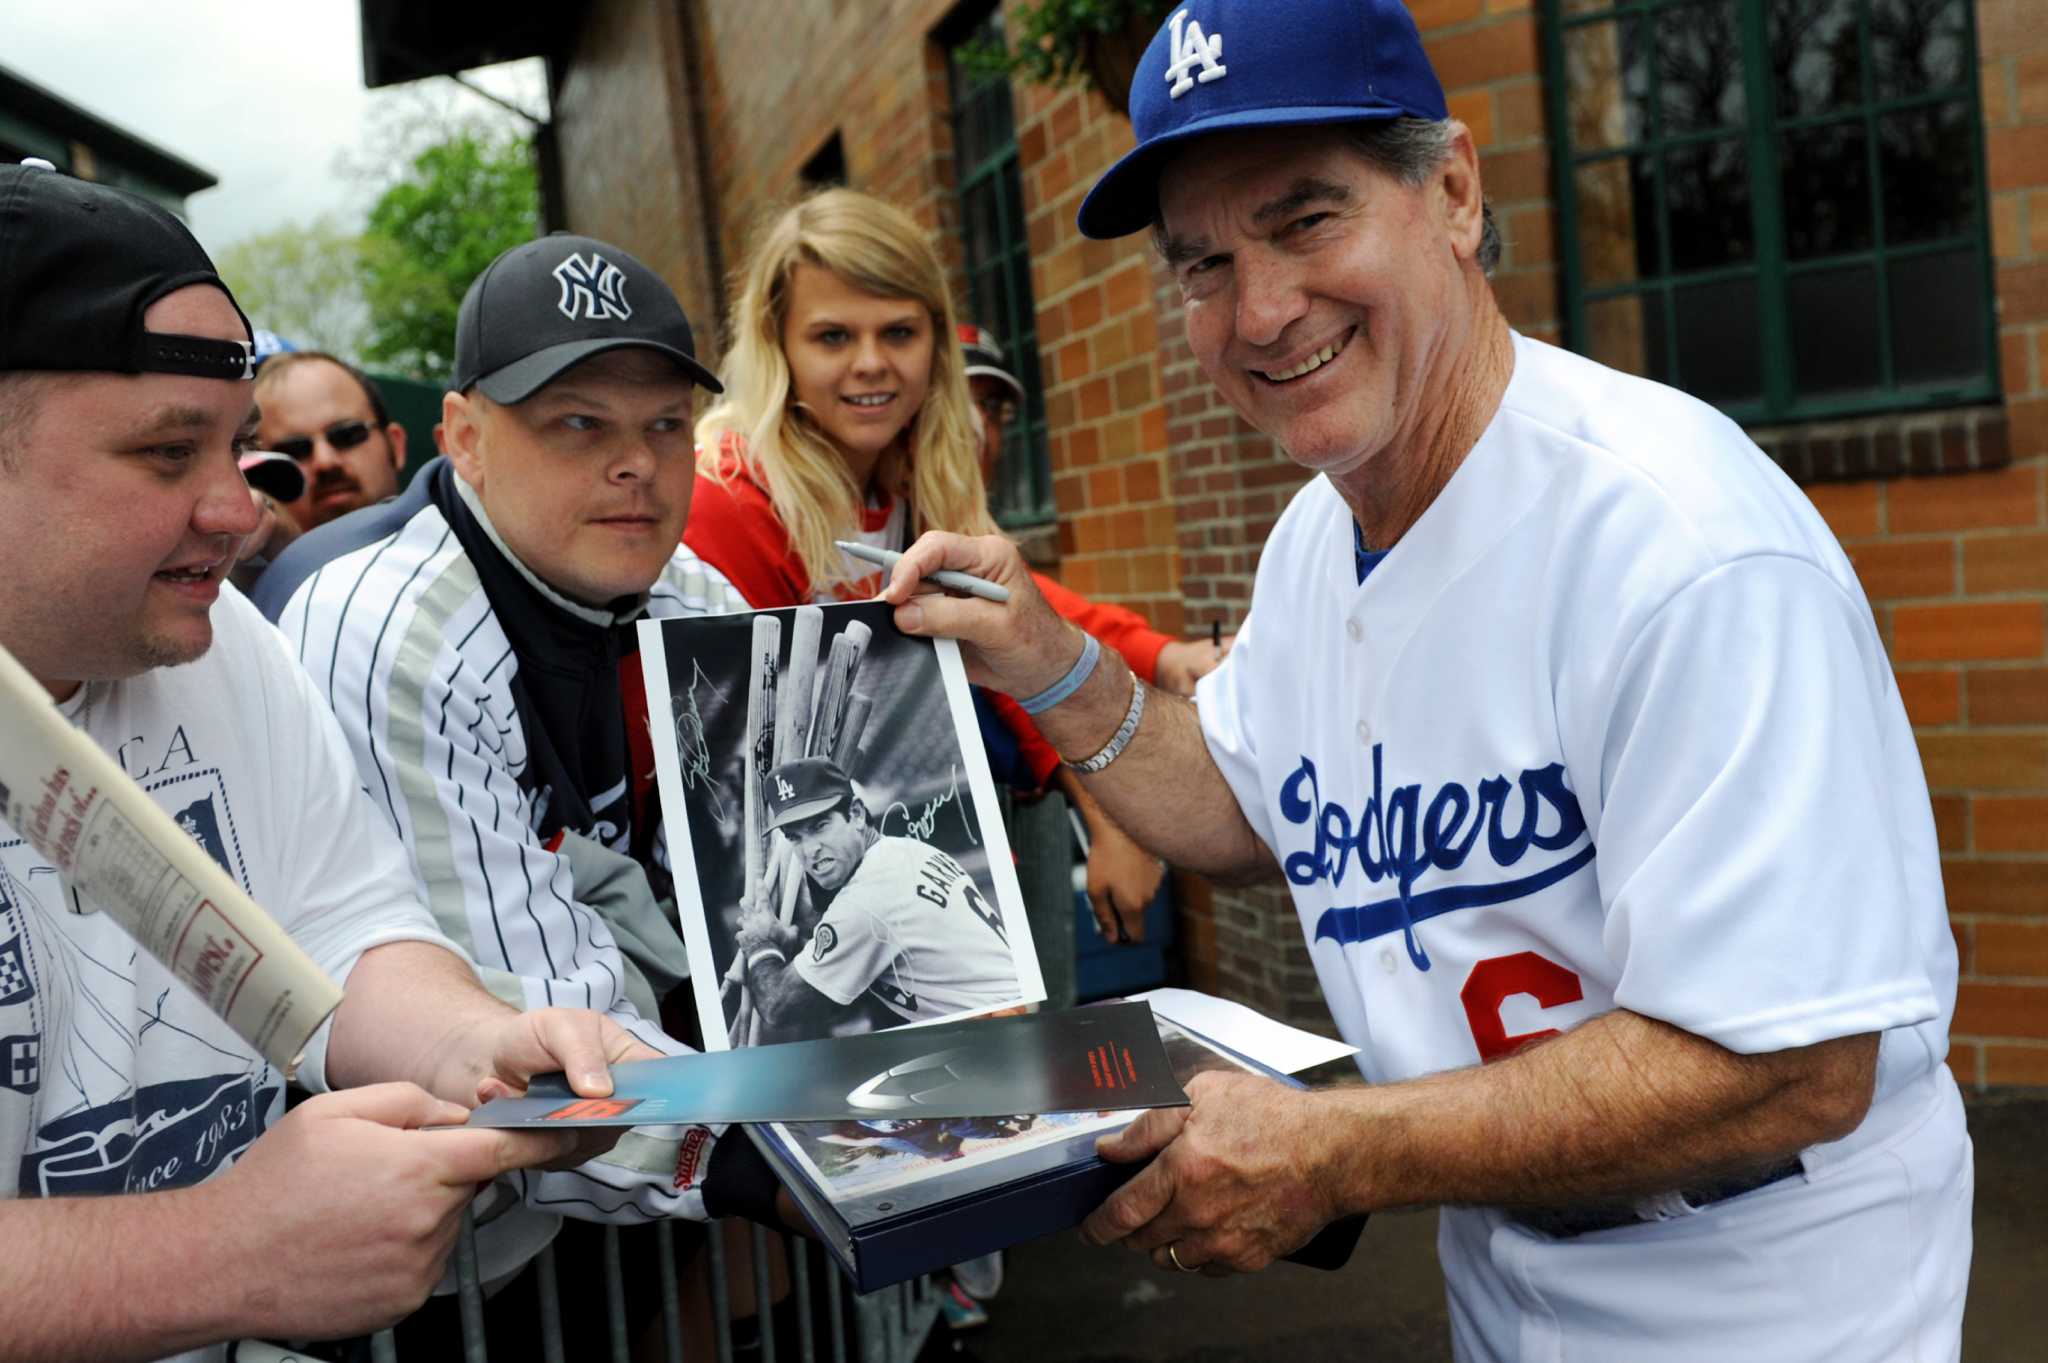 Making his pitch: Steve Garvey talks about his Hall of Fame hopes